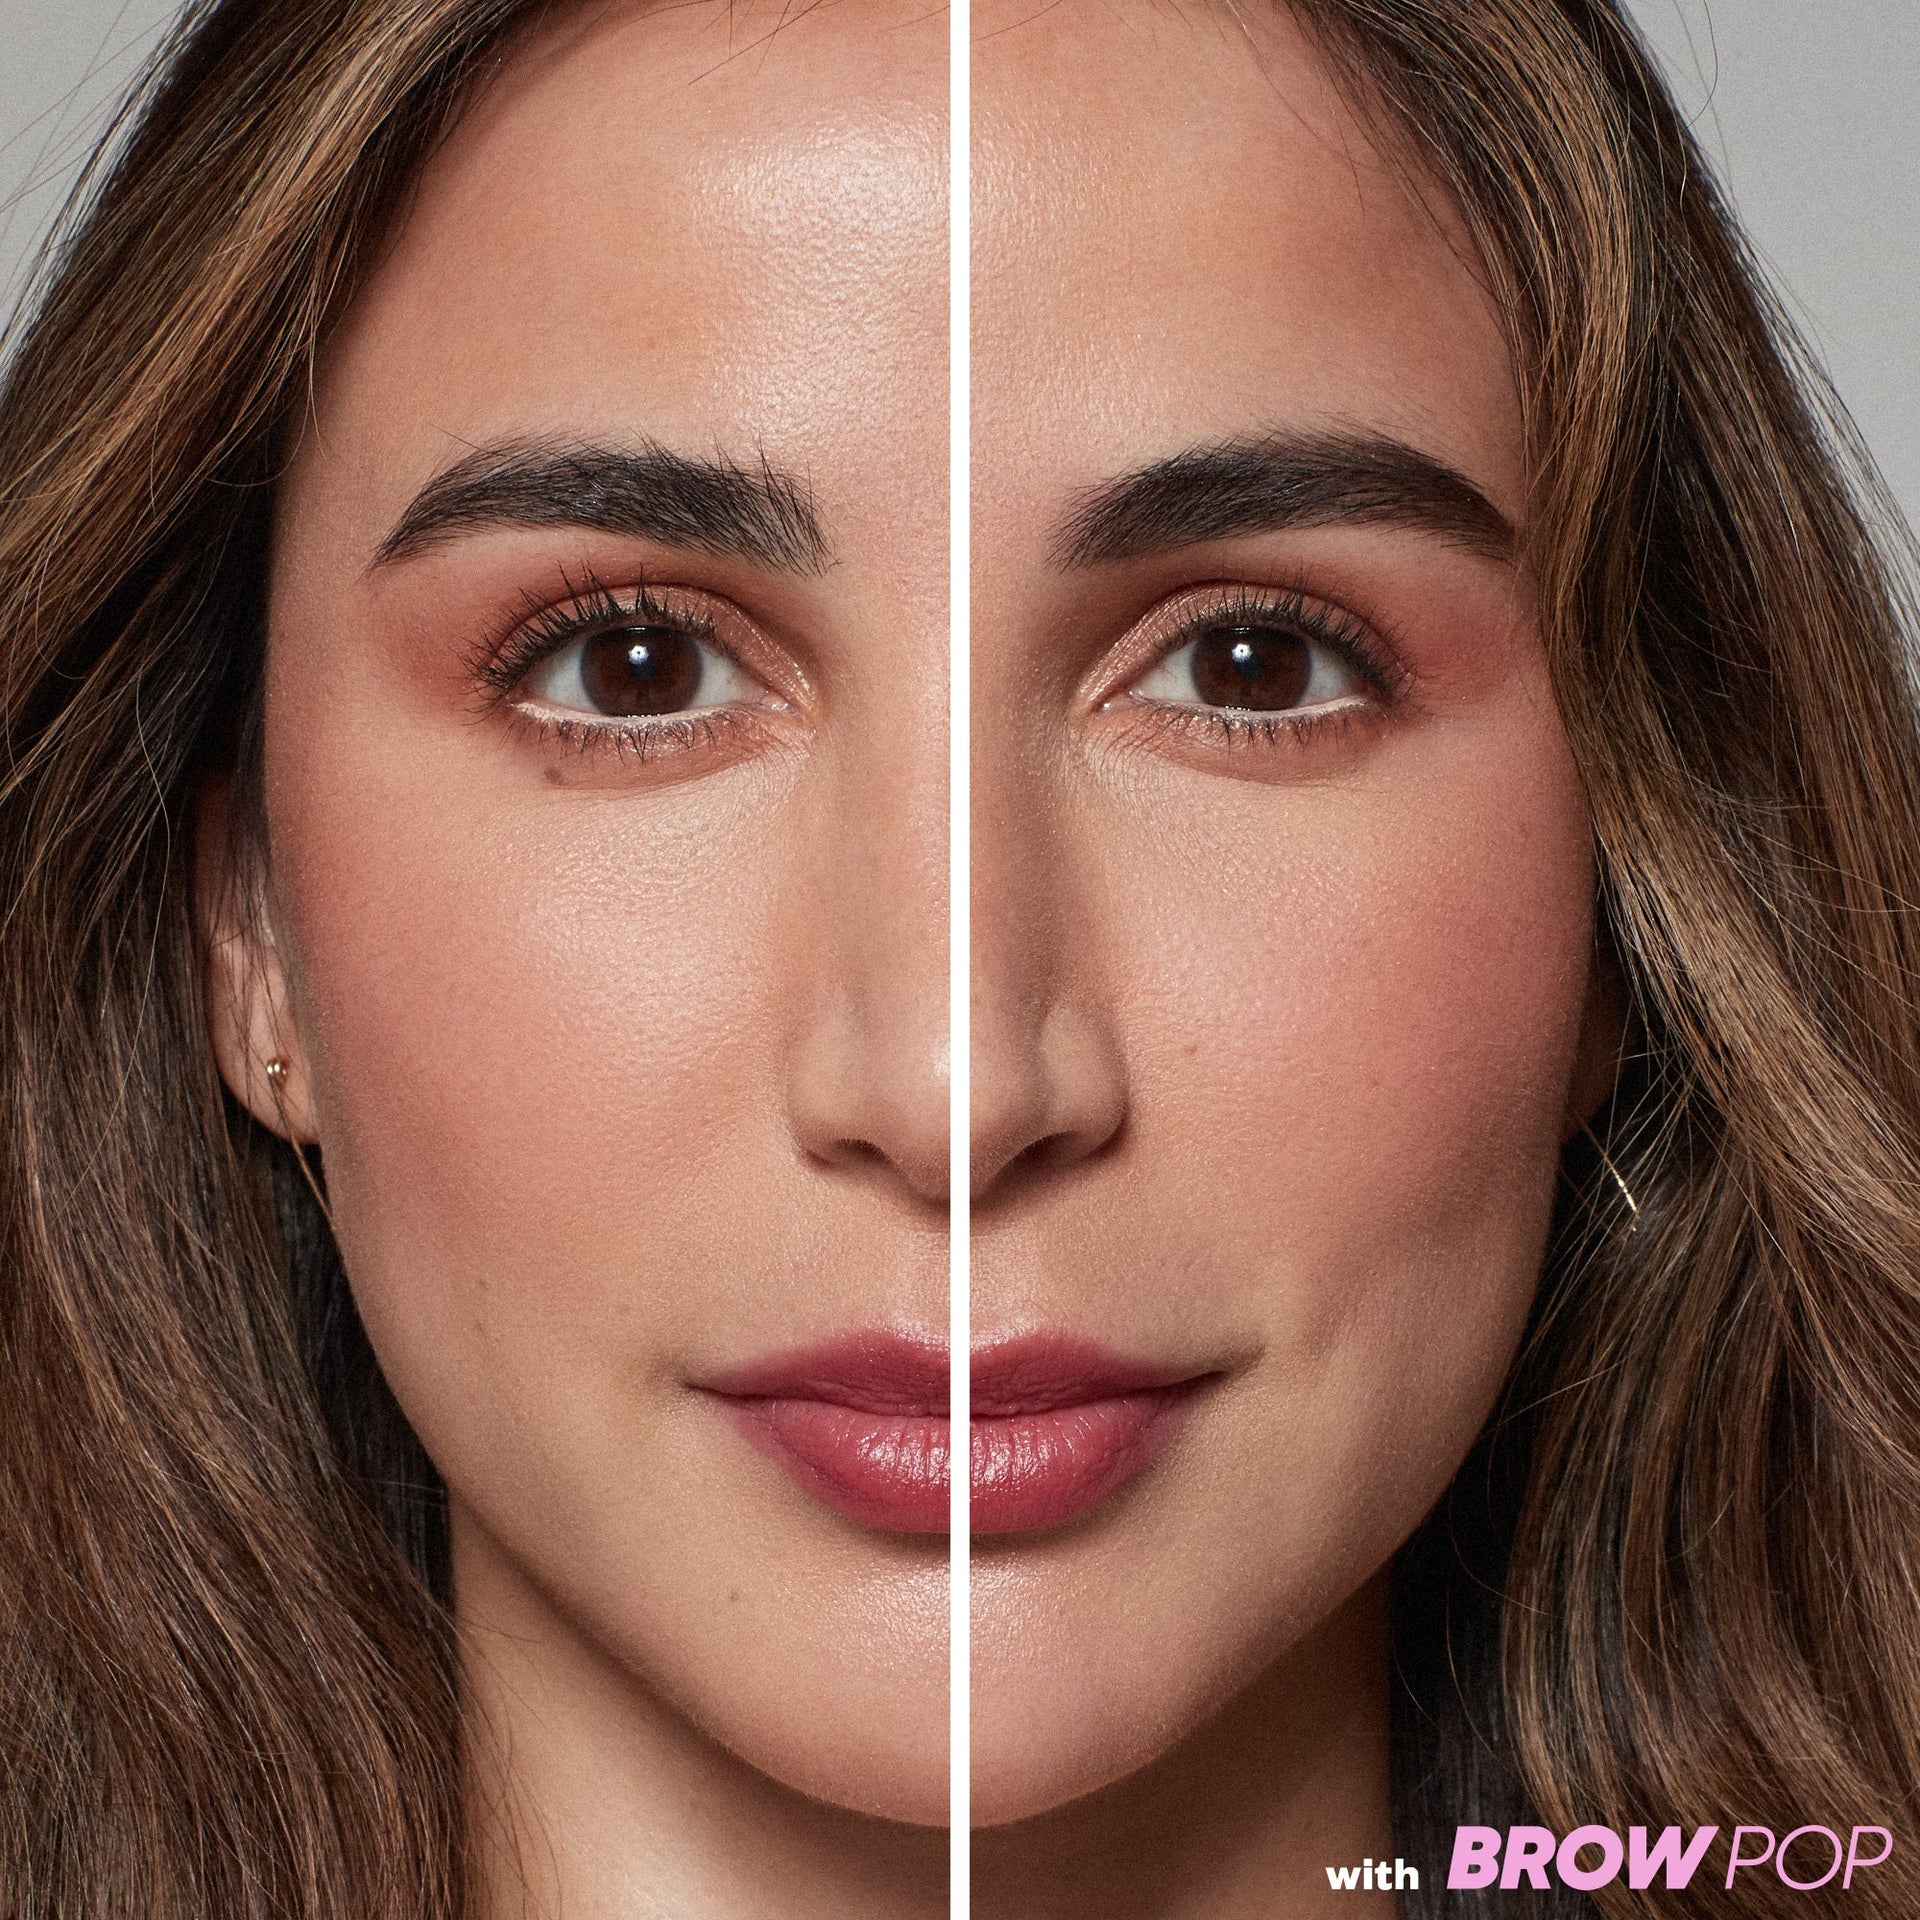 Before and after application of 'Dark Brown' Brow Pop shade.